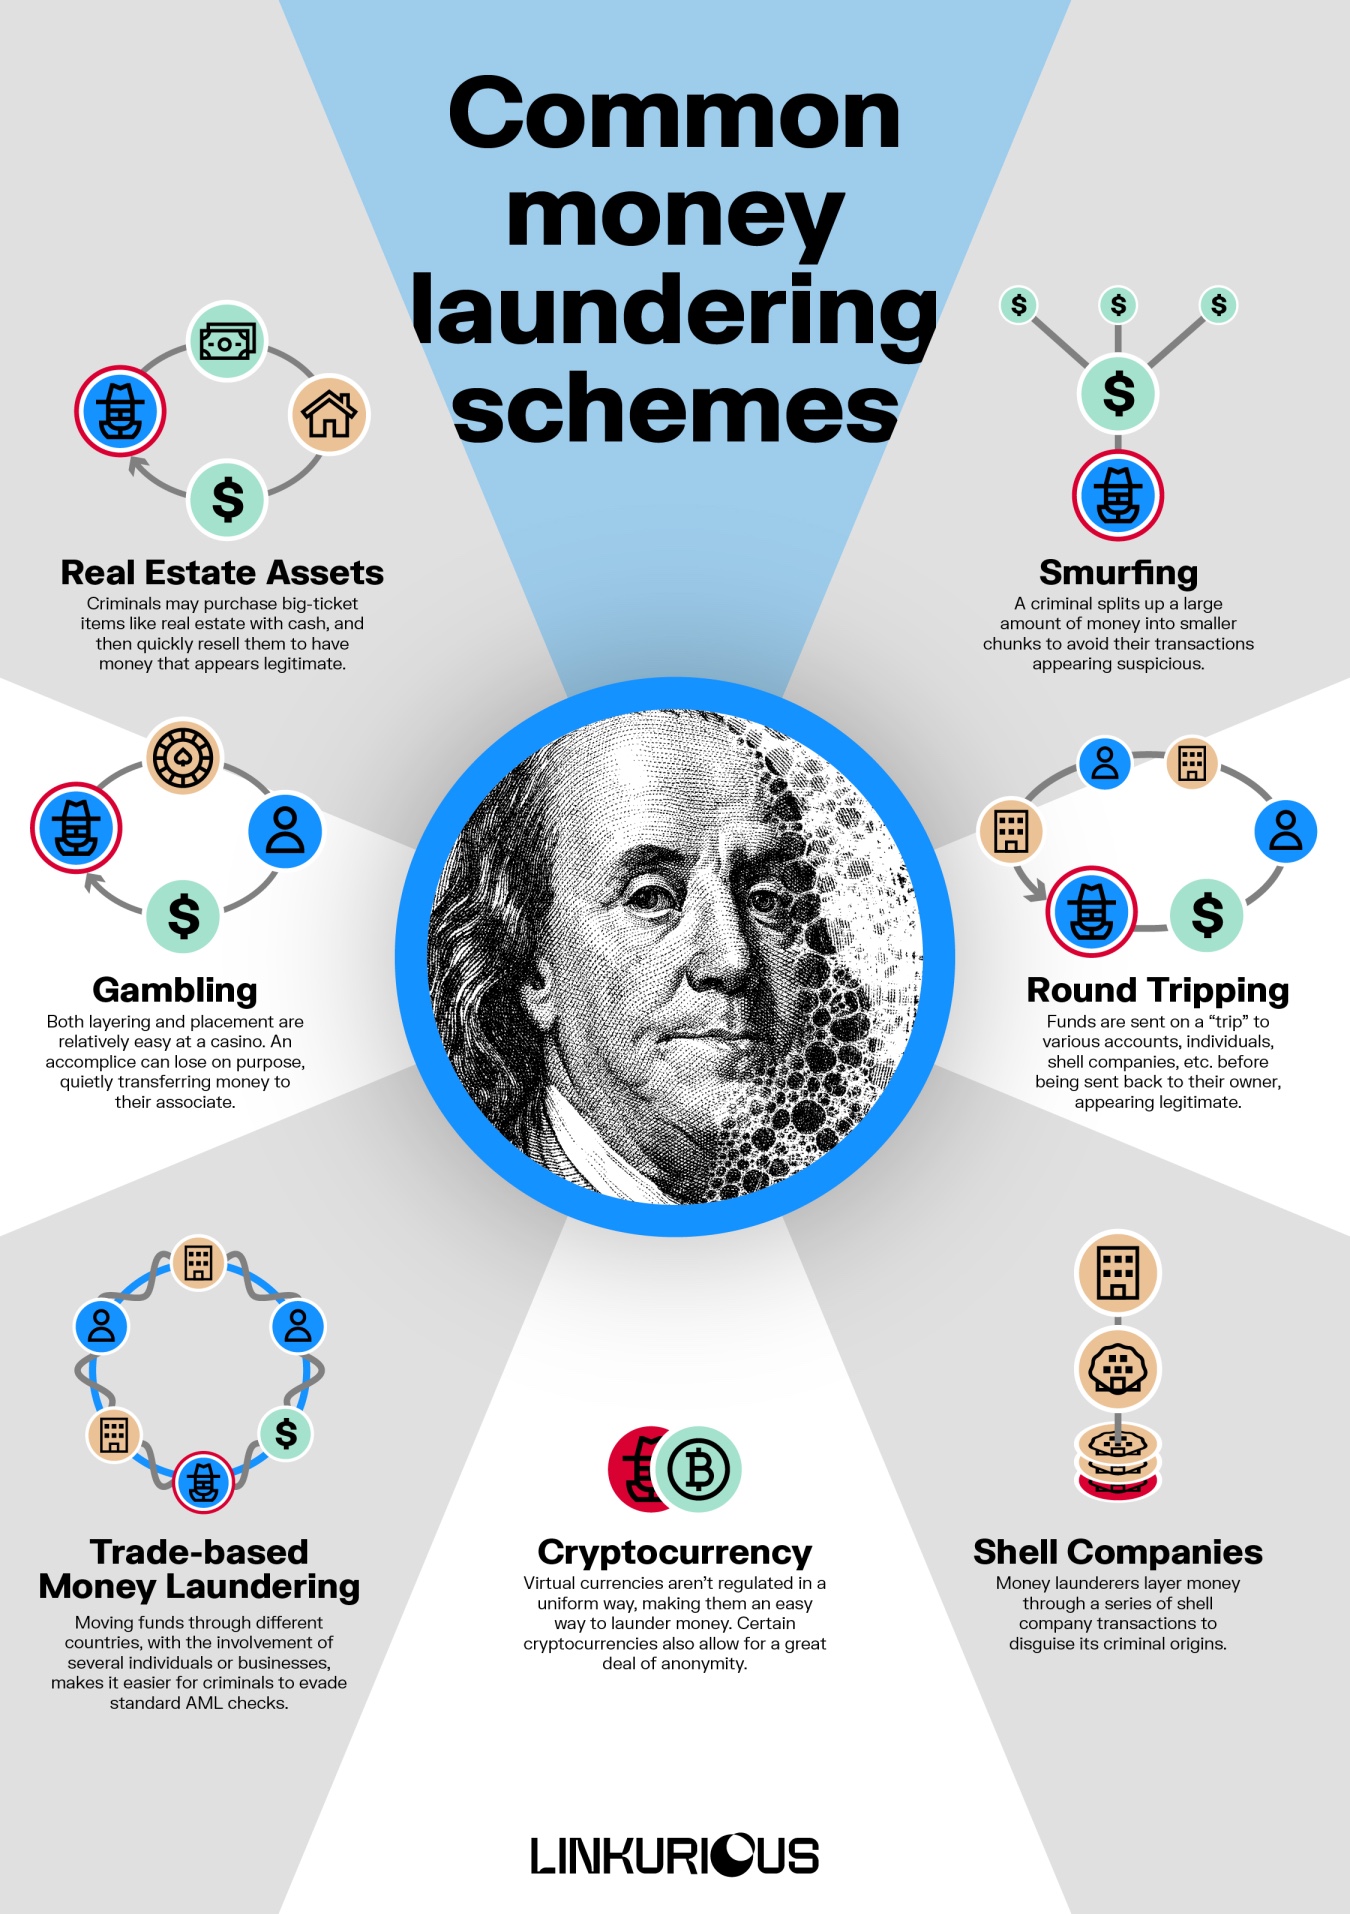 An infographic showing different types of money laundering schemes: real estate assets, gambling, trade-based money laundering, cryptocurrency, shell companies, round tripping, and smurfing